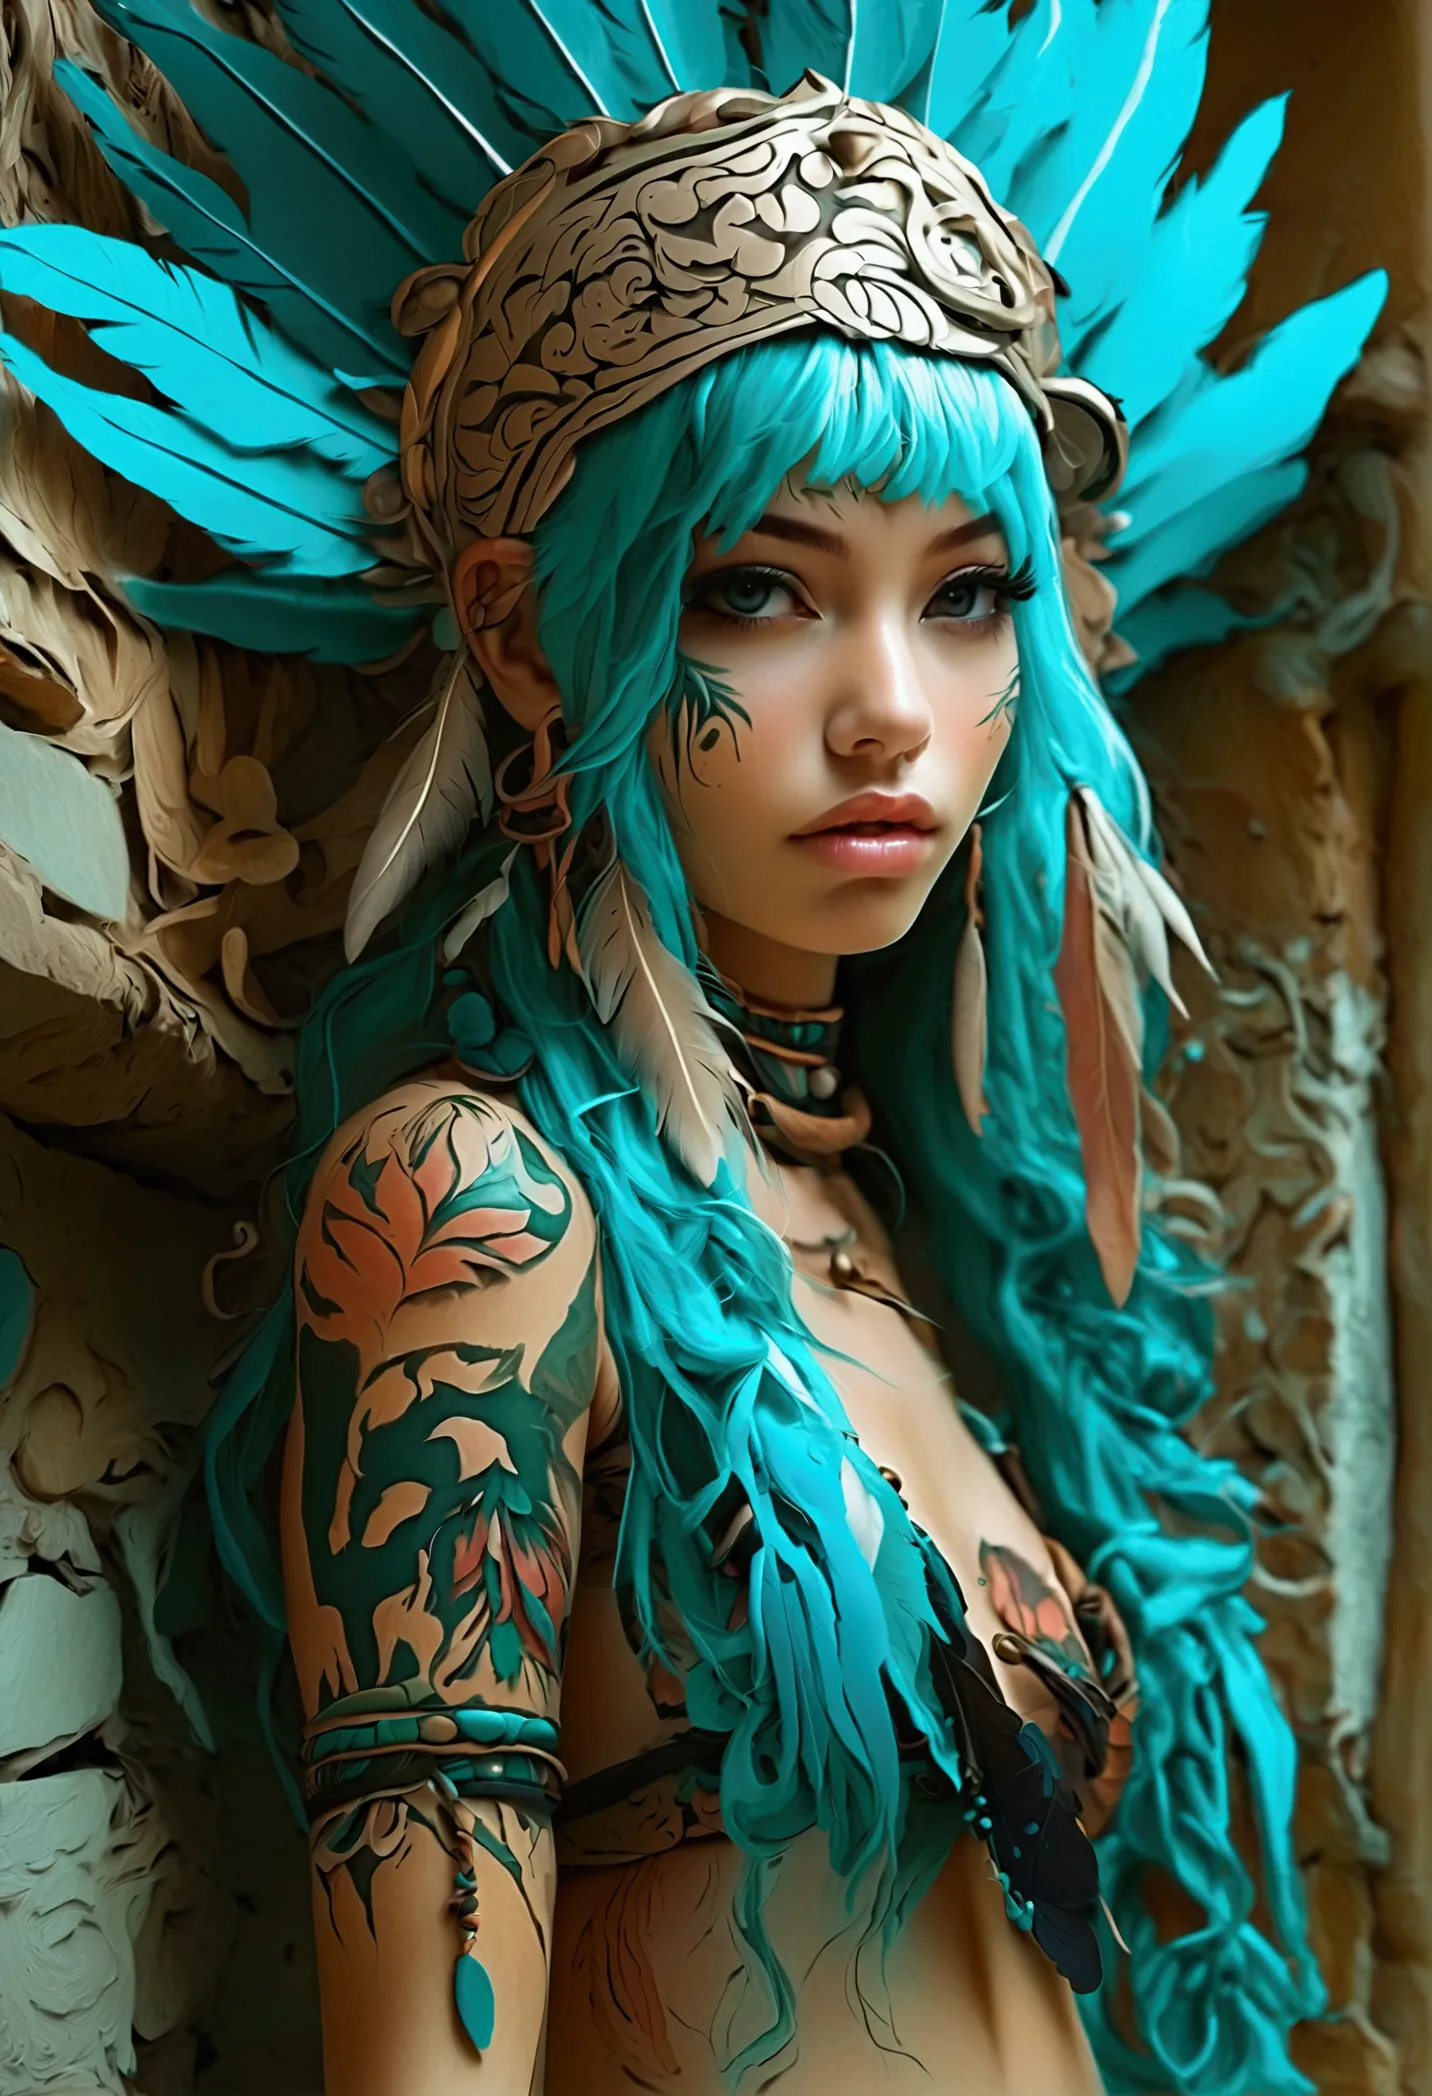 amazon girl, hair color aqua lsrgo add high definition add_detail:1, kitsune ears, tribal tattoo add_detail:1, in ruins in the j...